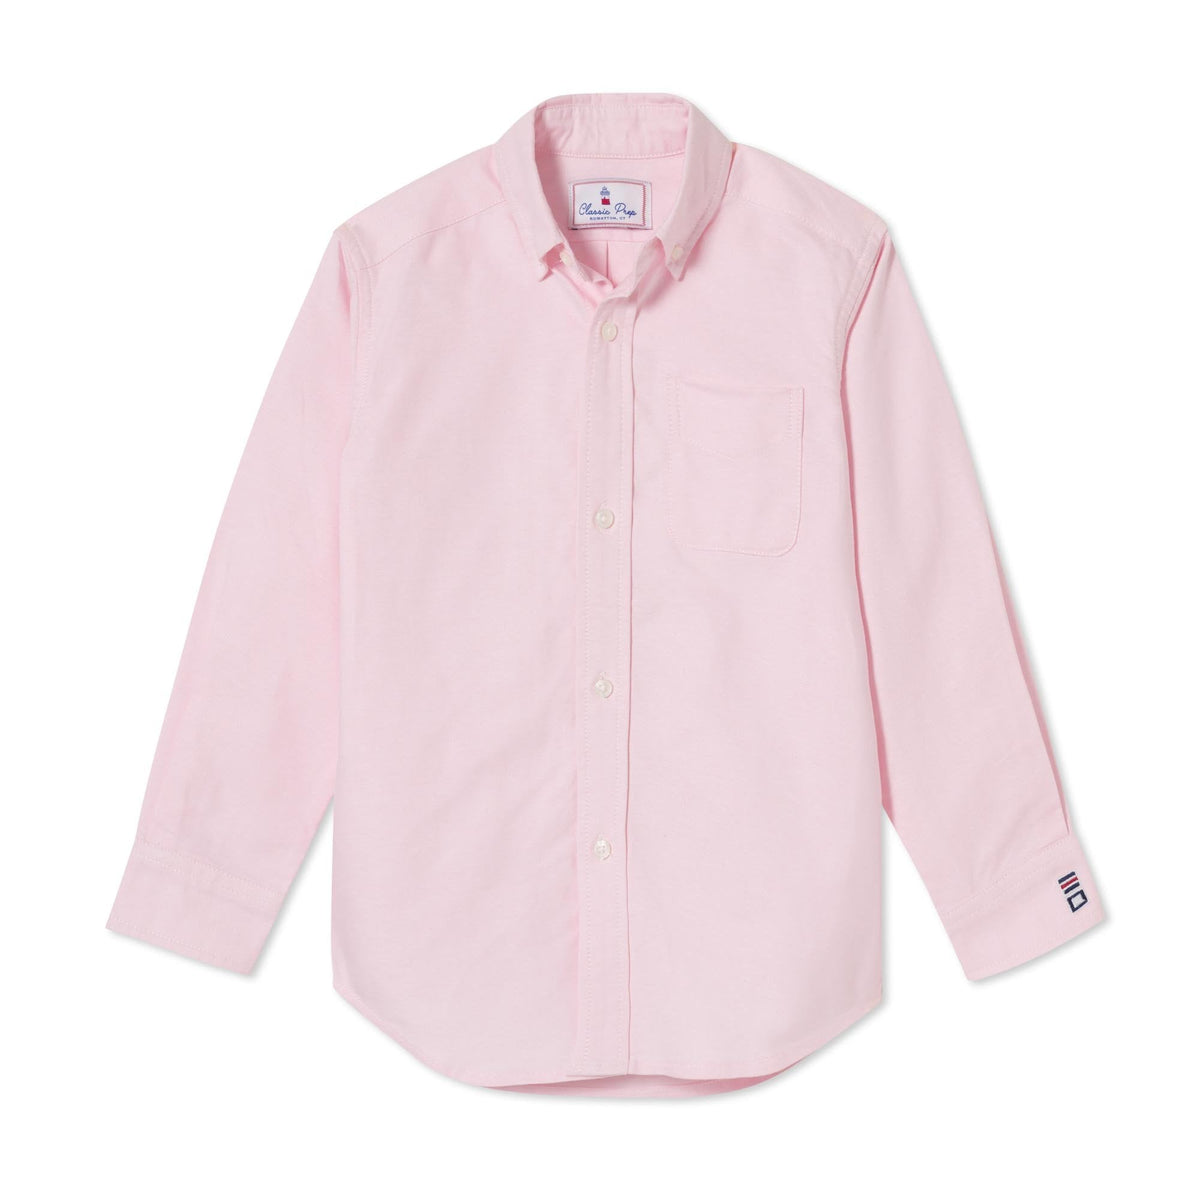 Classic and Preppy Owen Buttondown, Pinkesque Oxford-Shirts and Tops-Pinkesque-2T-CPC - Classic Prep Childrenswear